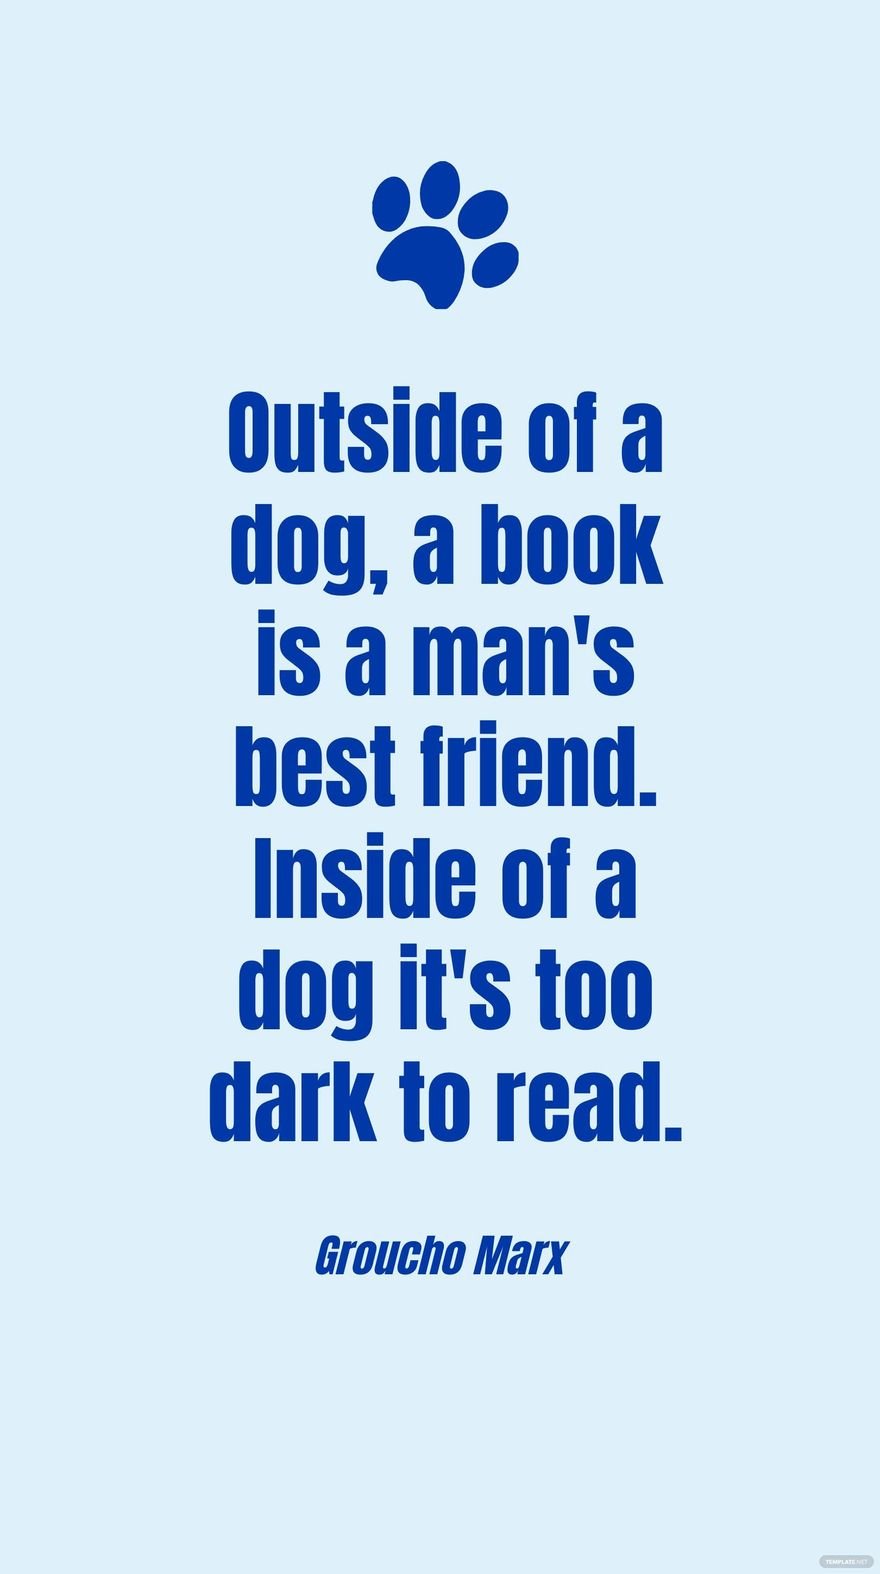 Groucho Marx - Outside of a dog, a book is a man's best friend. Inside of a dog it's too dark to read.